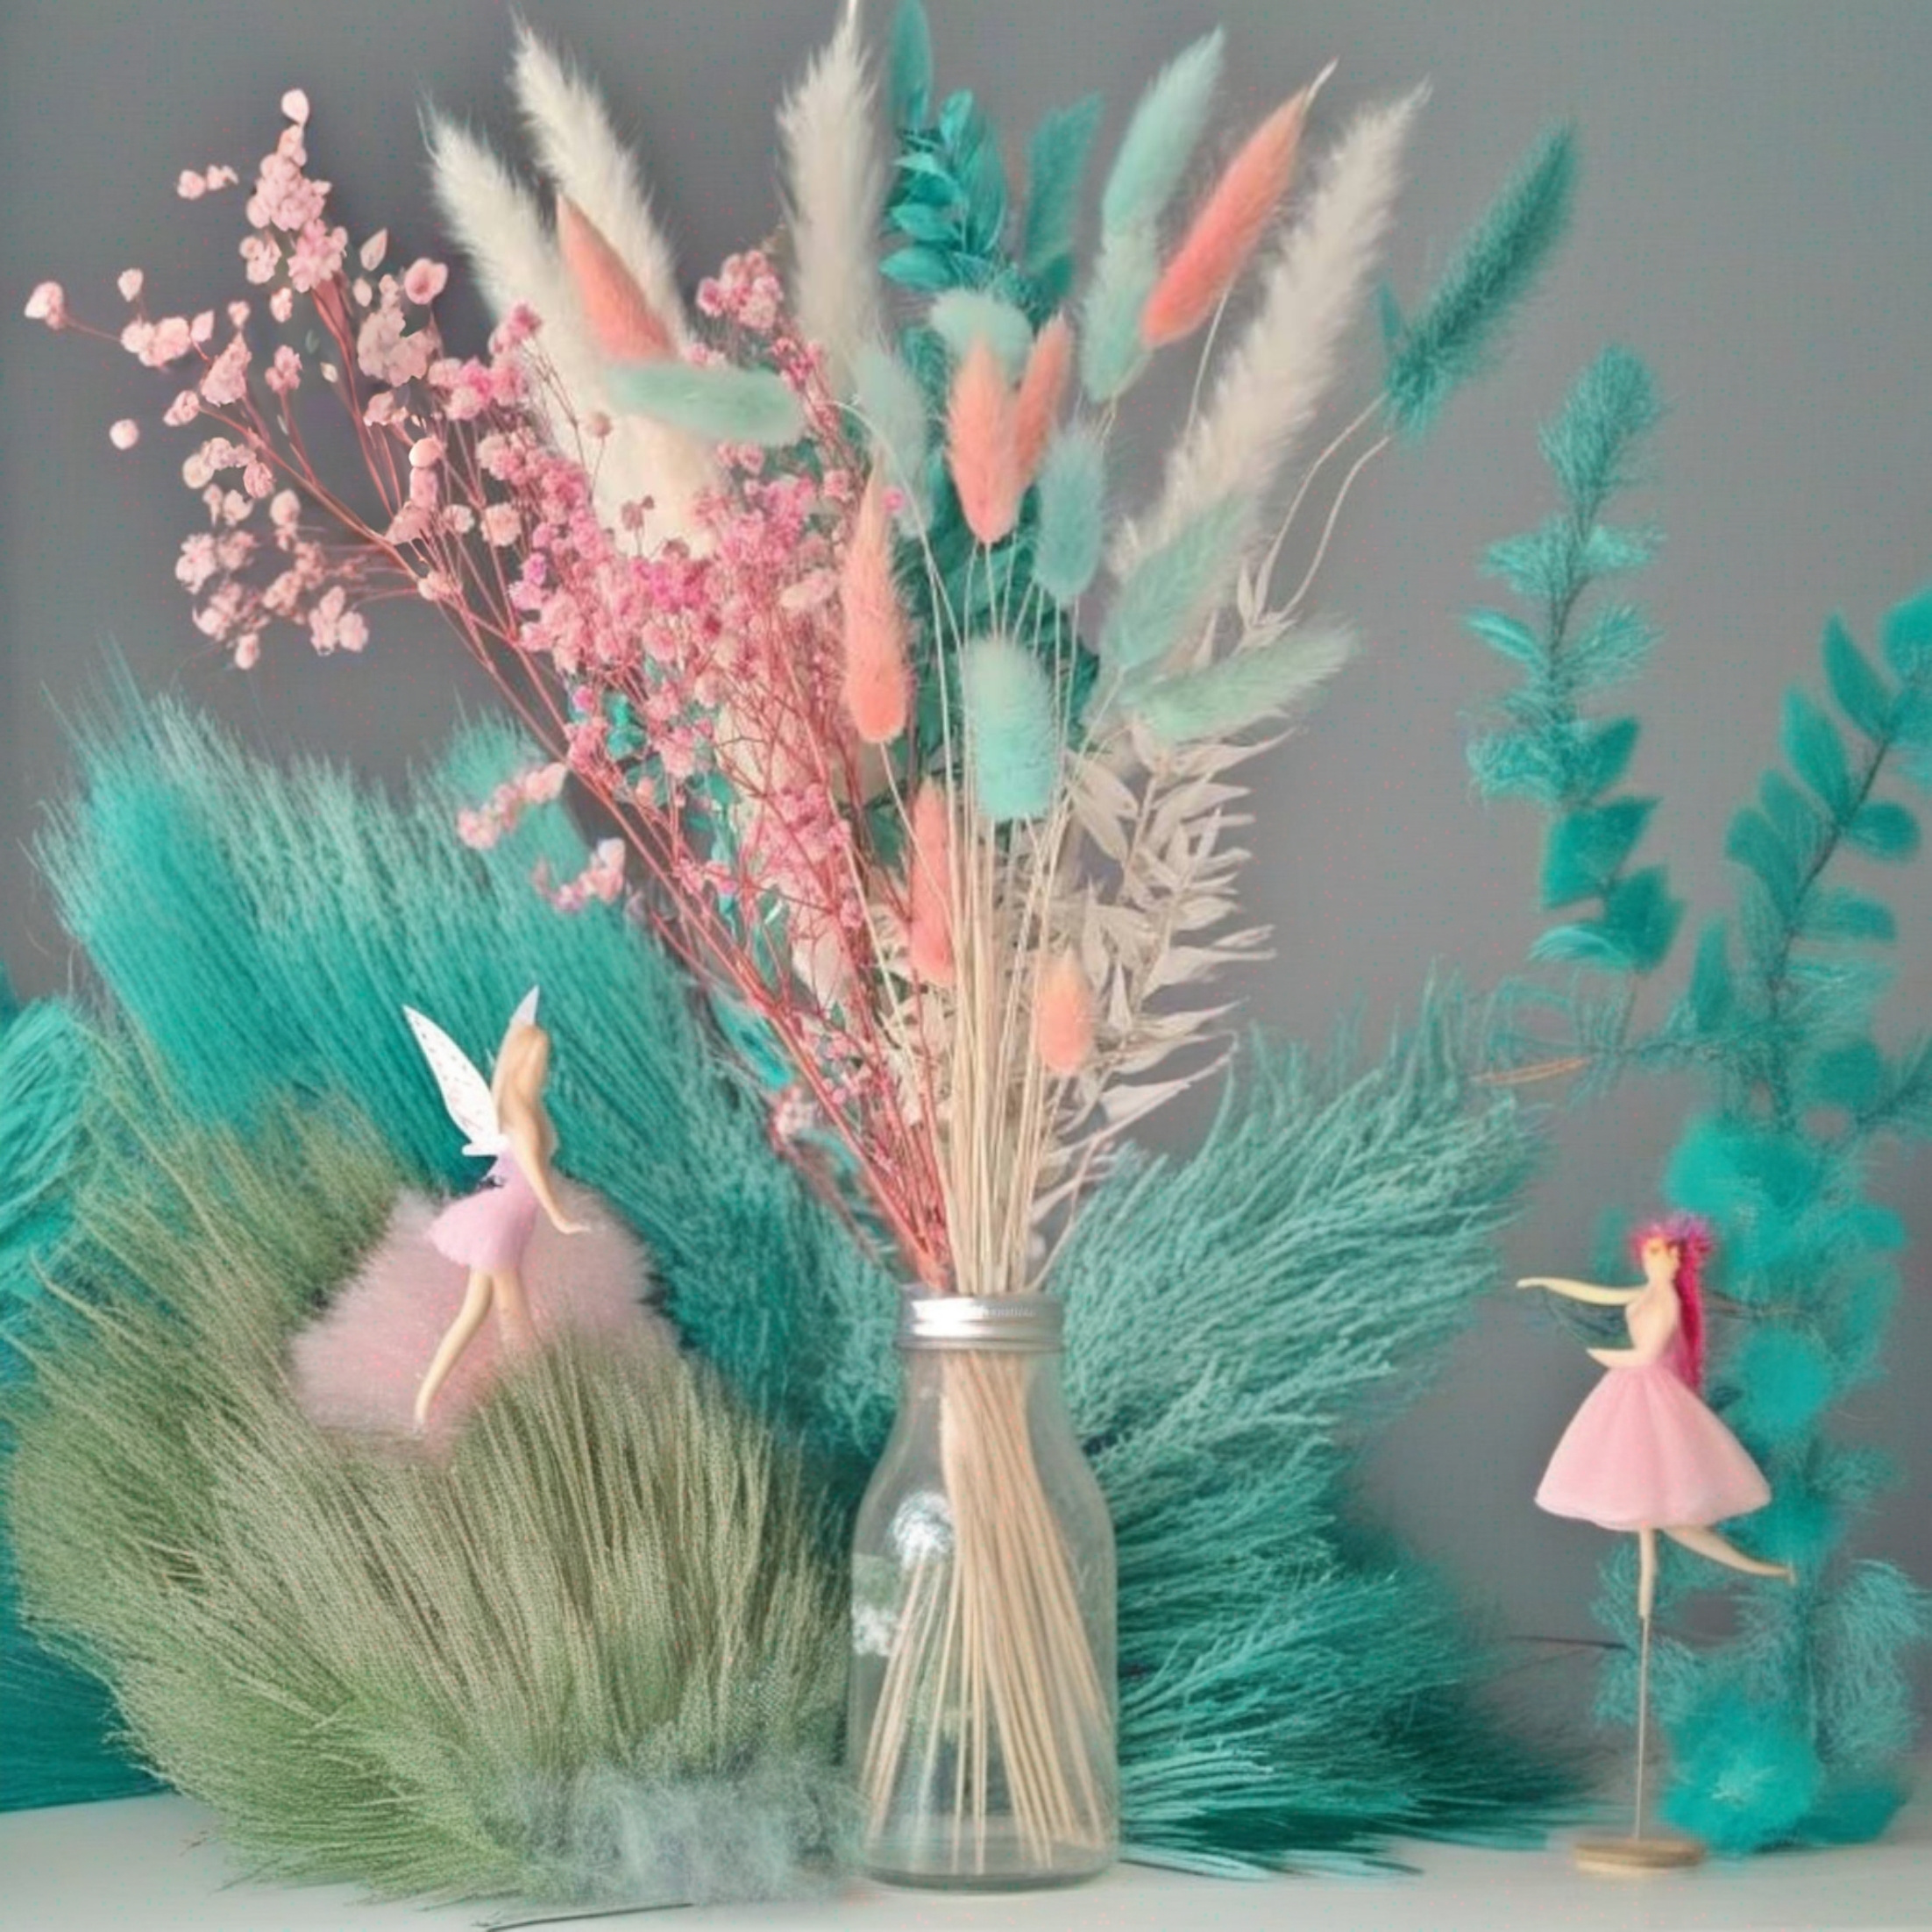 

Pastel Bouquet: Gypsophila, White Pampas Grass, Turquoise Ruscus, Pink & Blue Bunnytails - Dried Flowers Arrangement In A Glass Vase